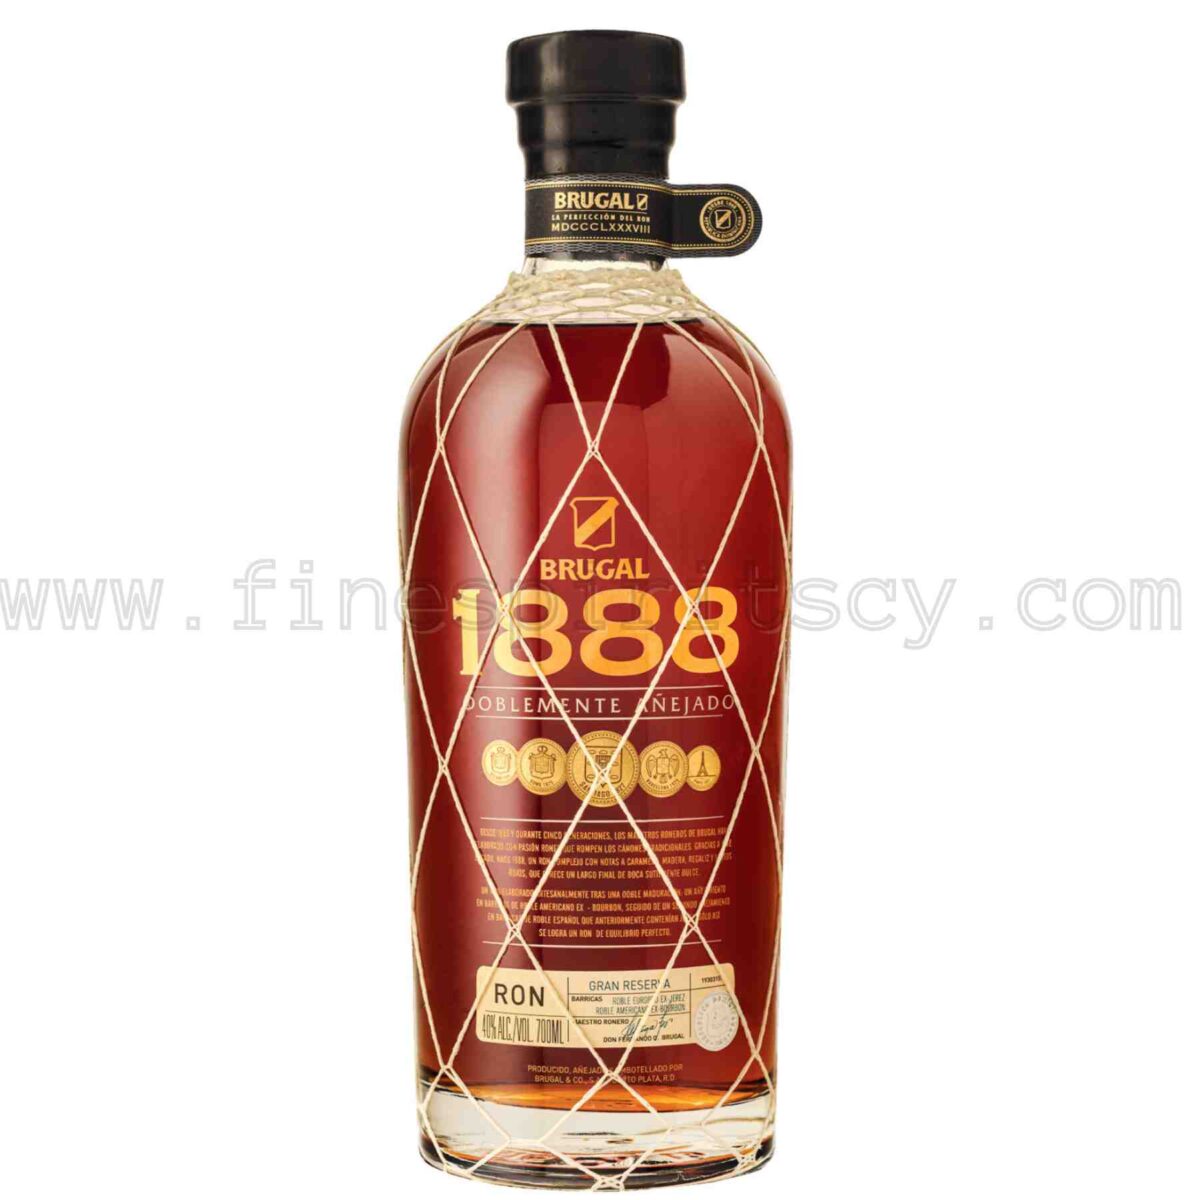 Brugal 1888 Double Aged 700ml 70cl 0.7L